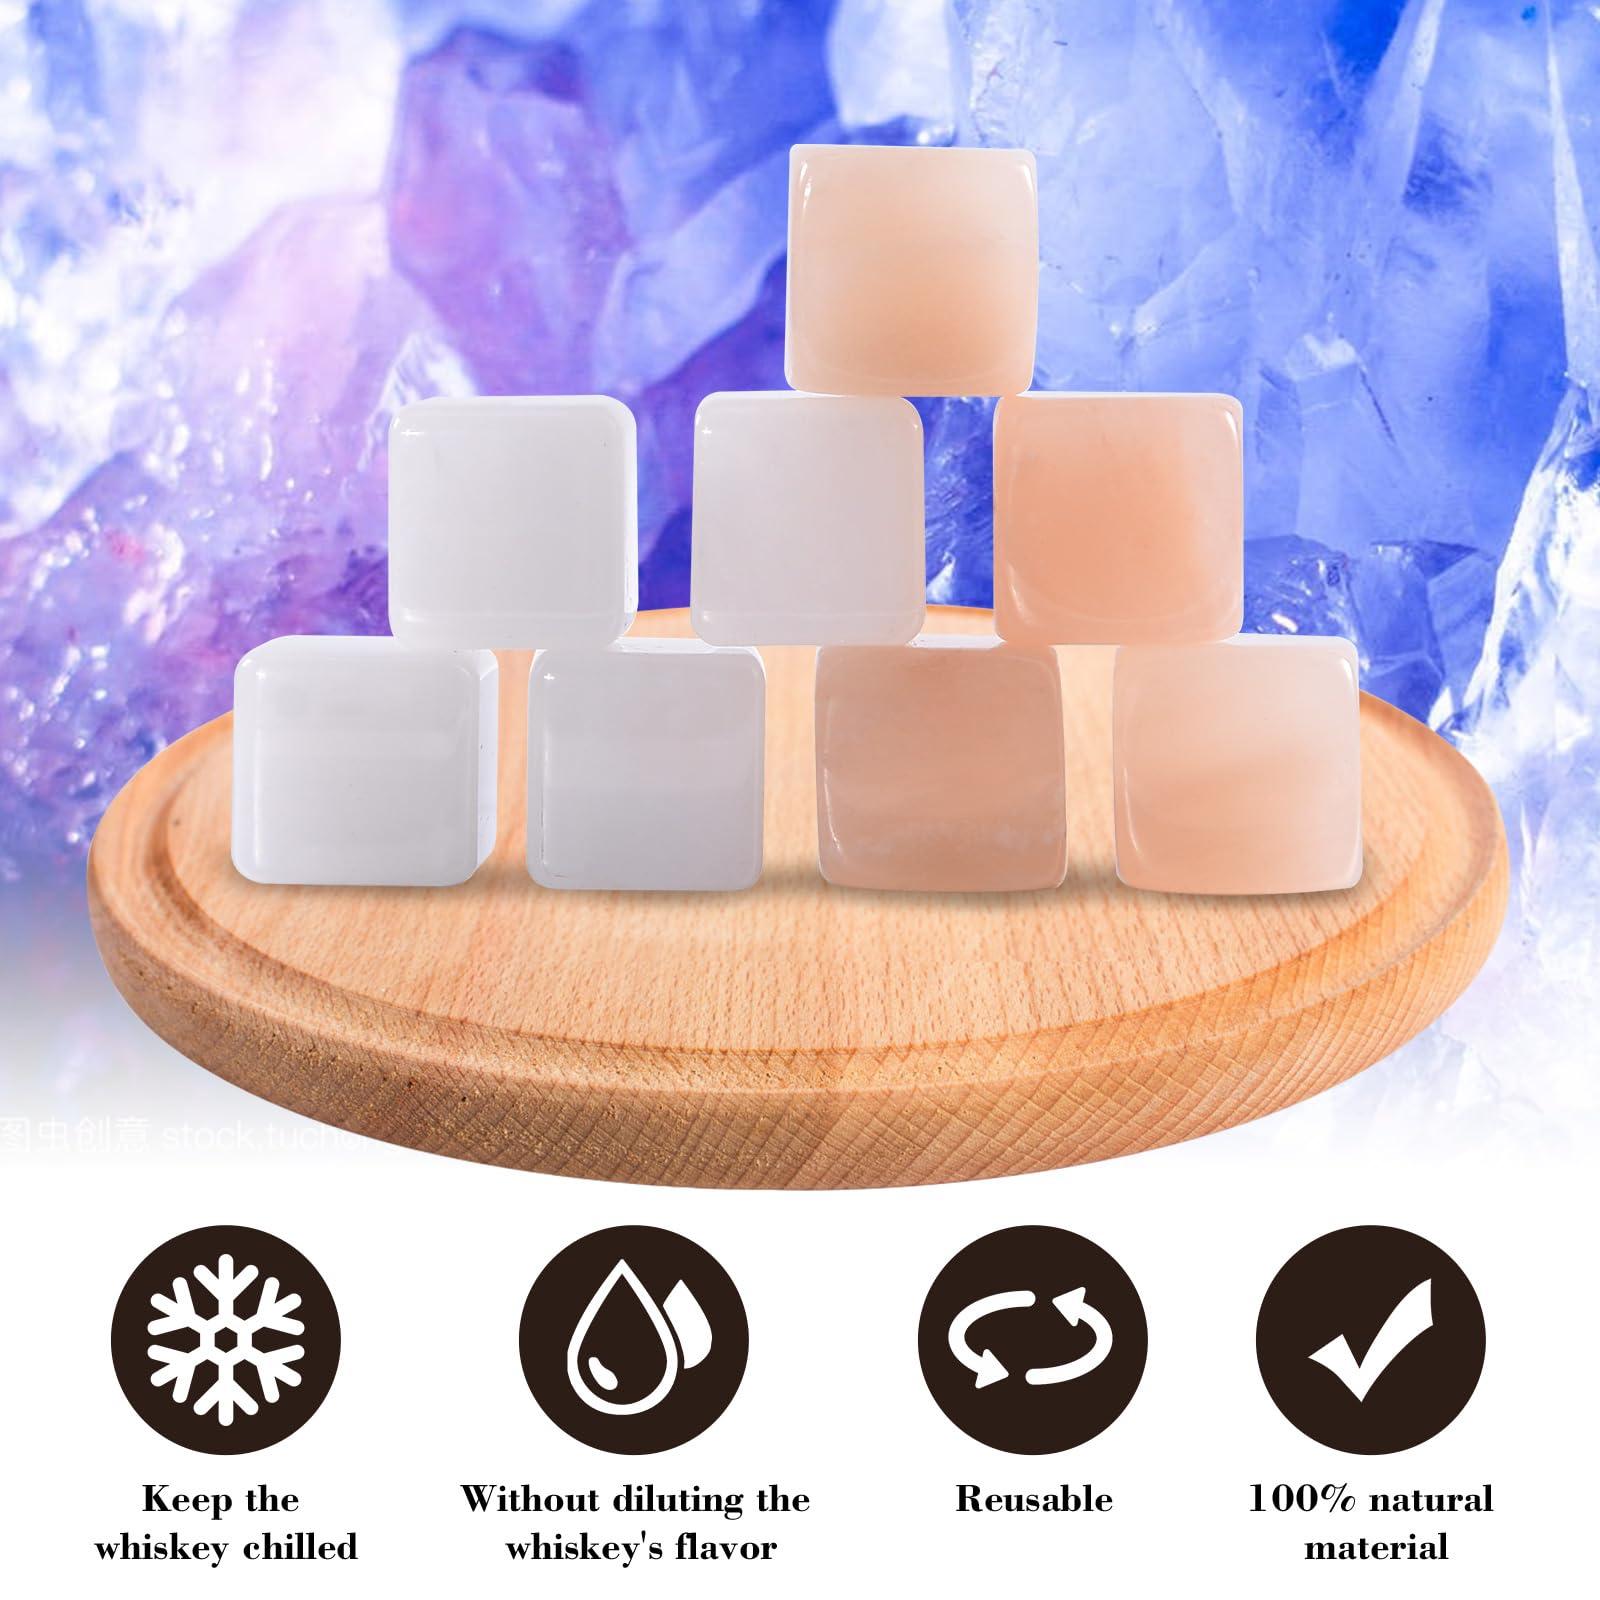 EooCoo 8pcs Marble Whisky Stones Gift Set for Men, Premium Wooden Box with Glasses,Two-Color Design Suitable for Couples/Friends, Easy Storage, for Anniversary Birthday Wedding Housewarming 1